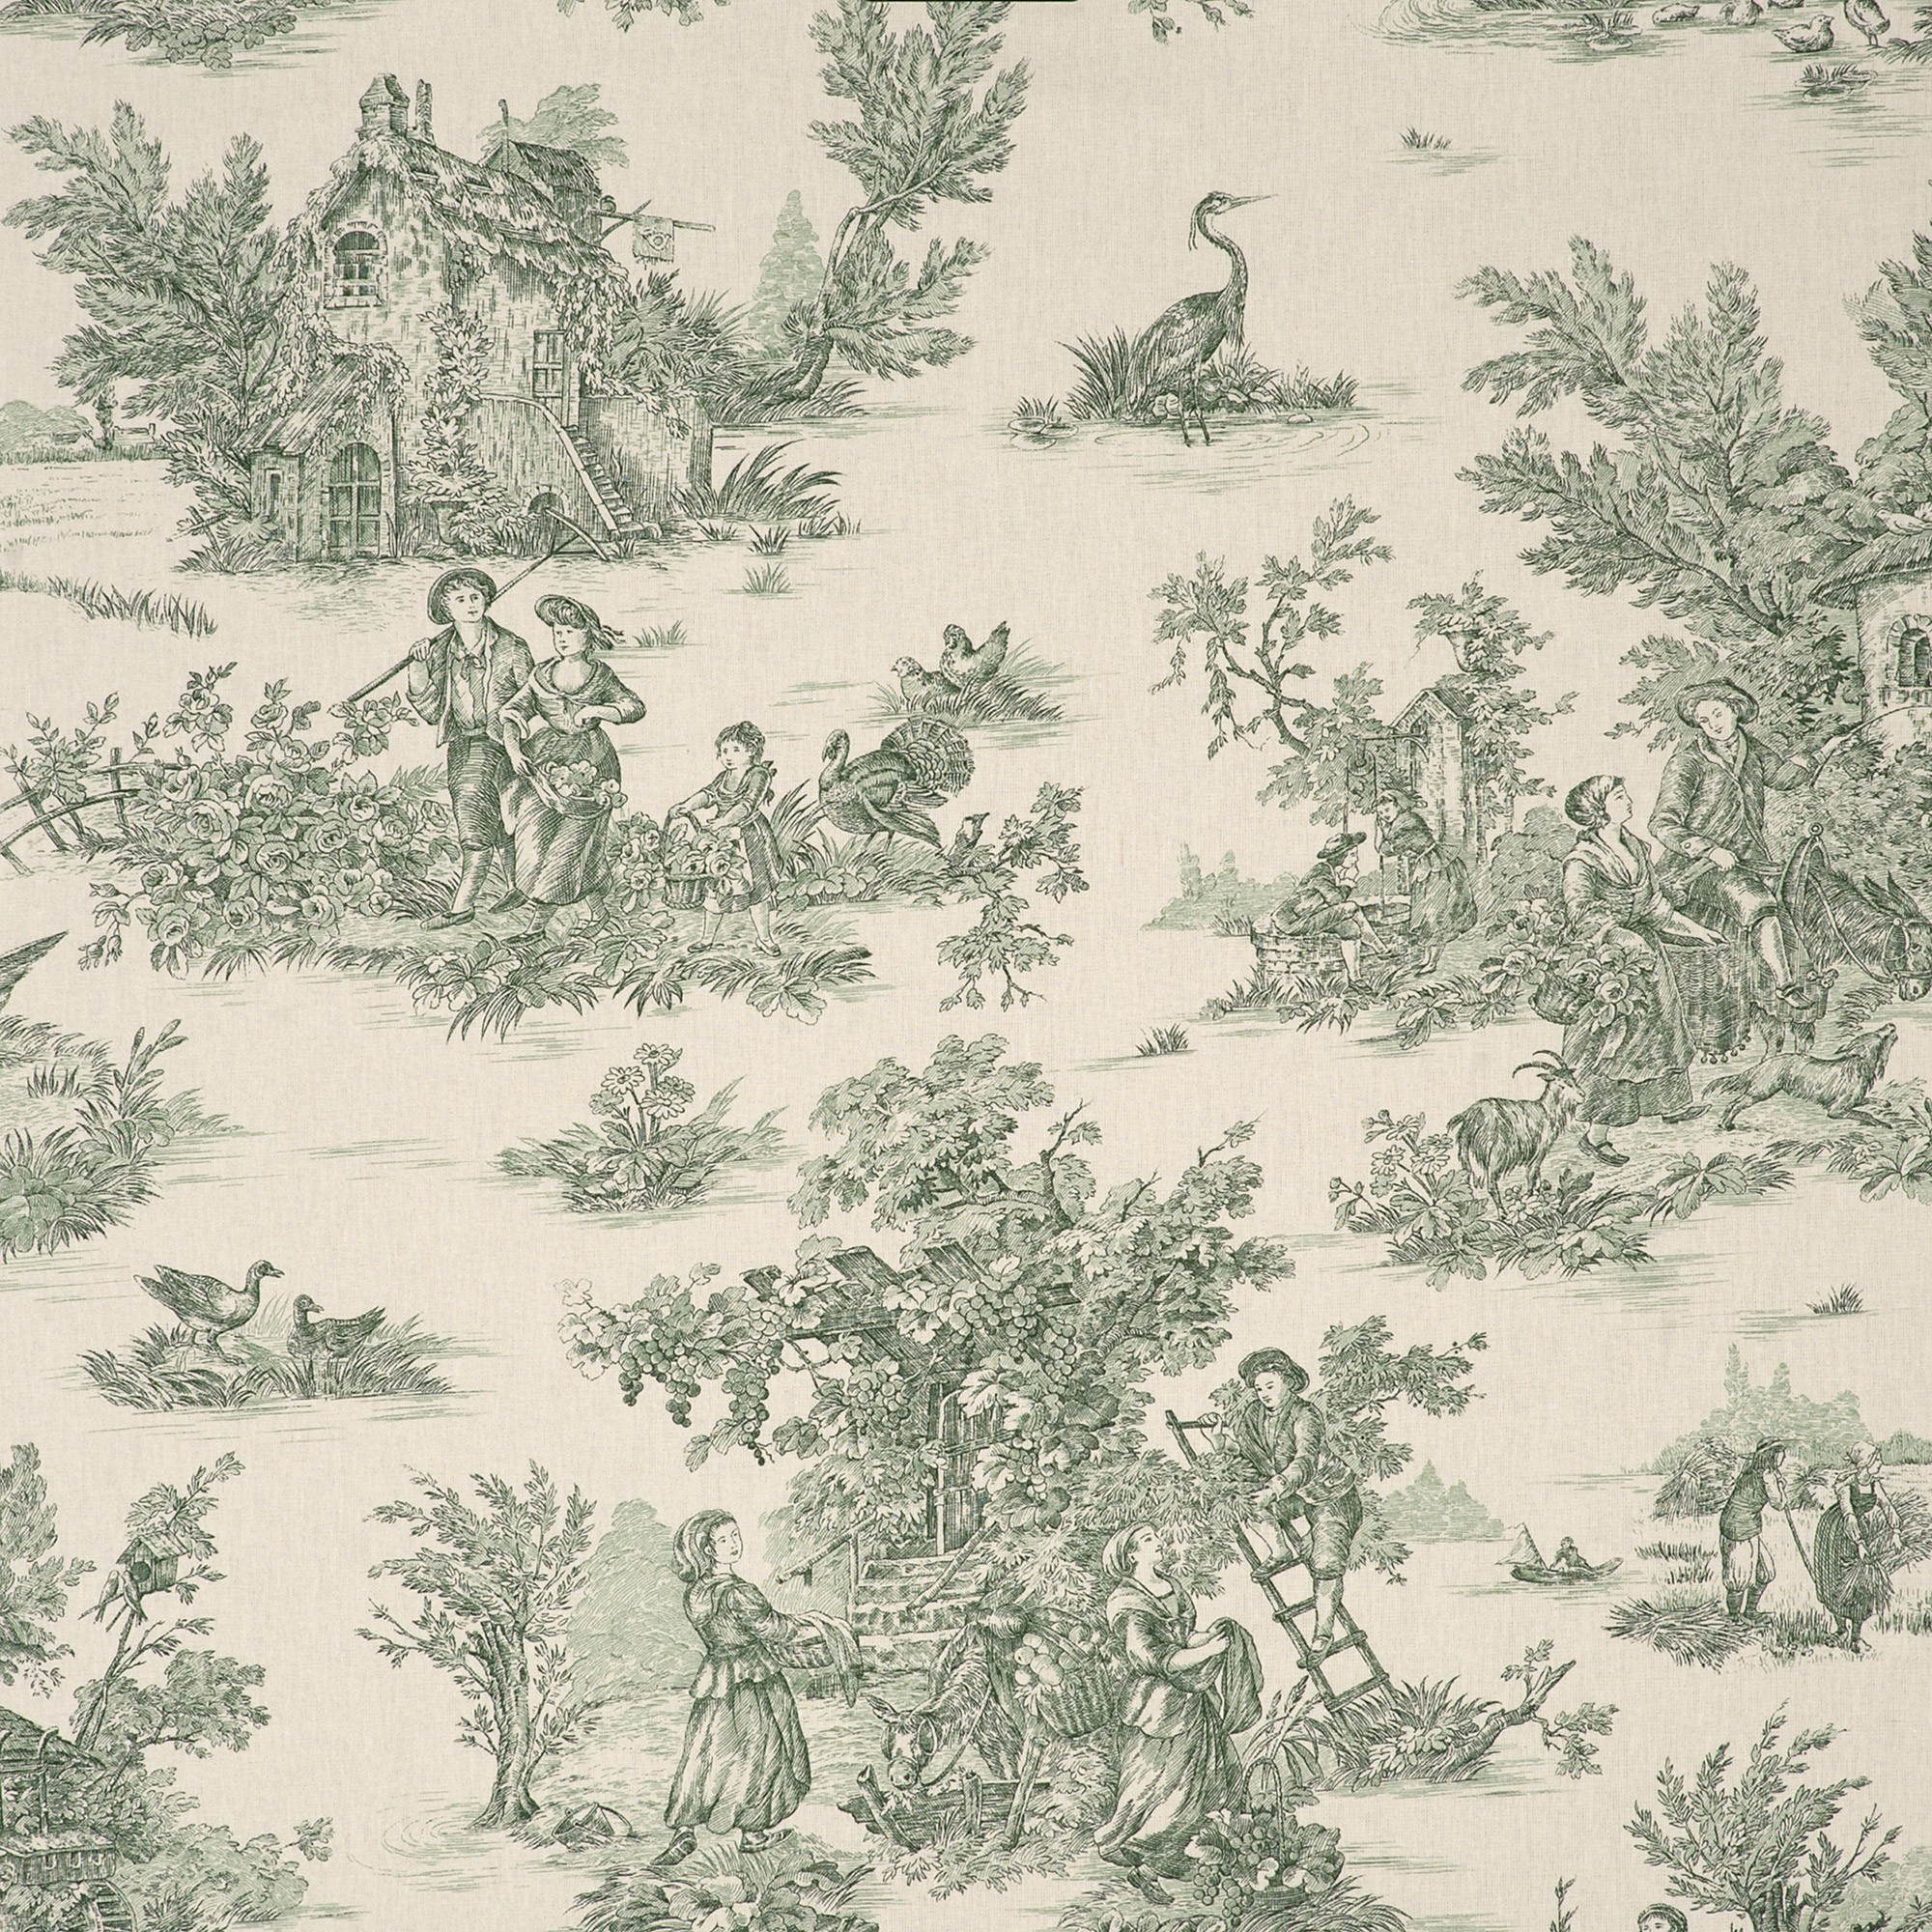 Toile Exploring A Traditional Design Pattern April 29th